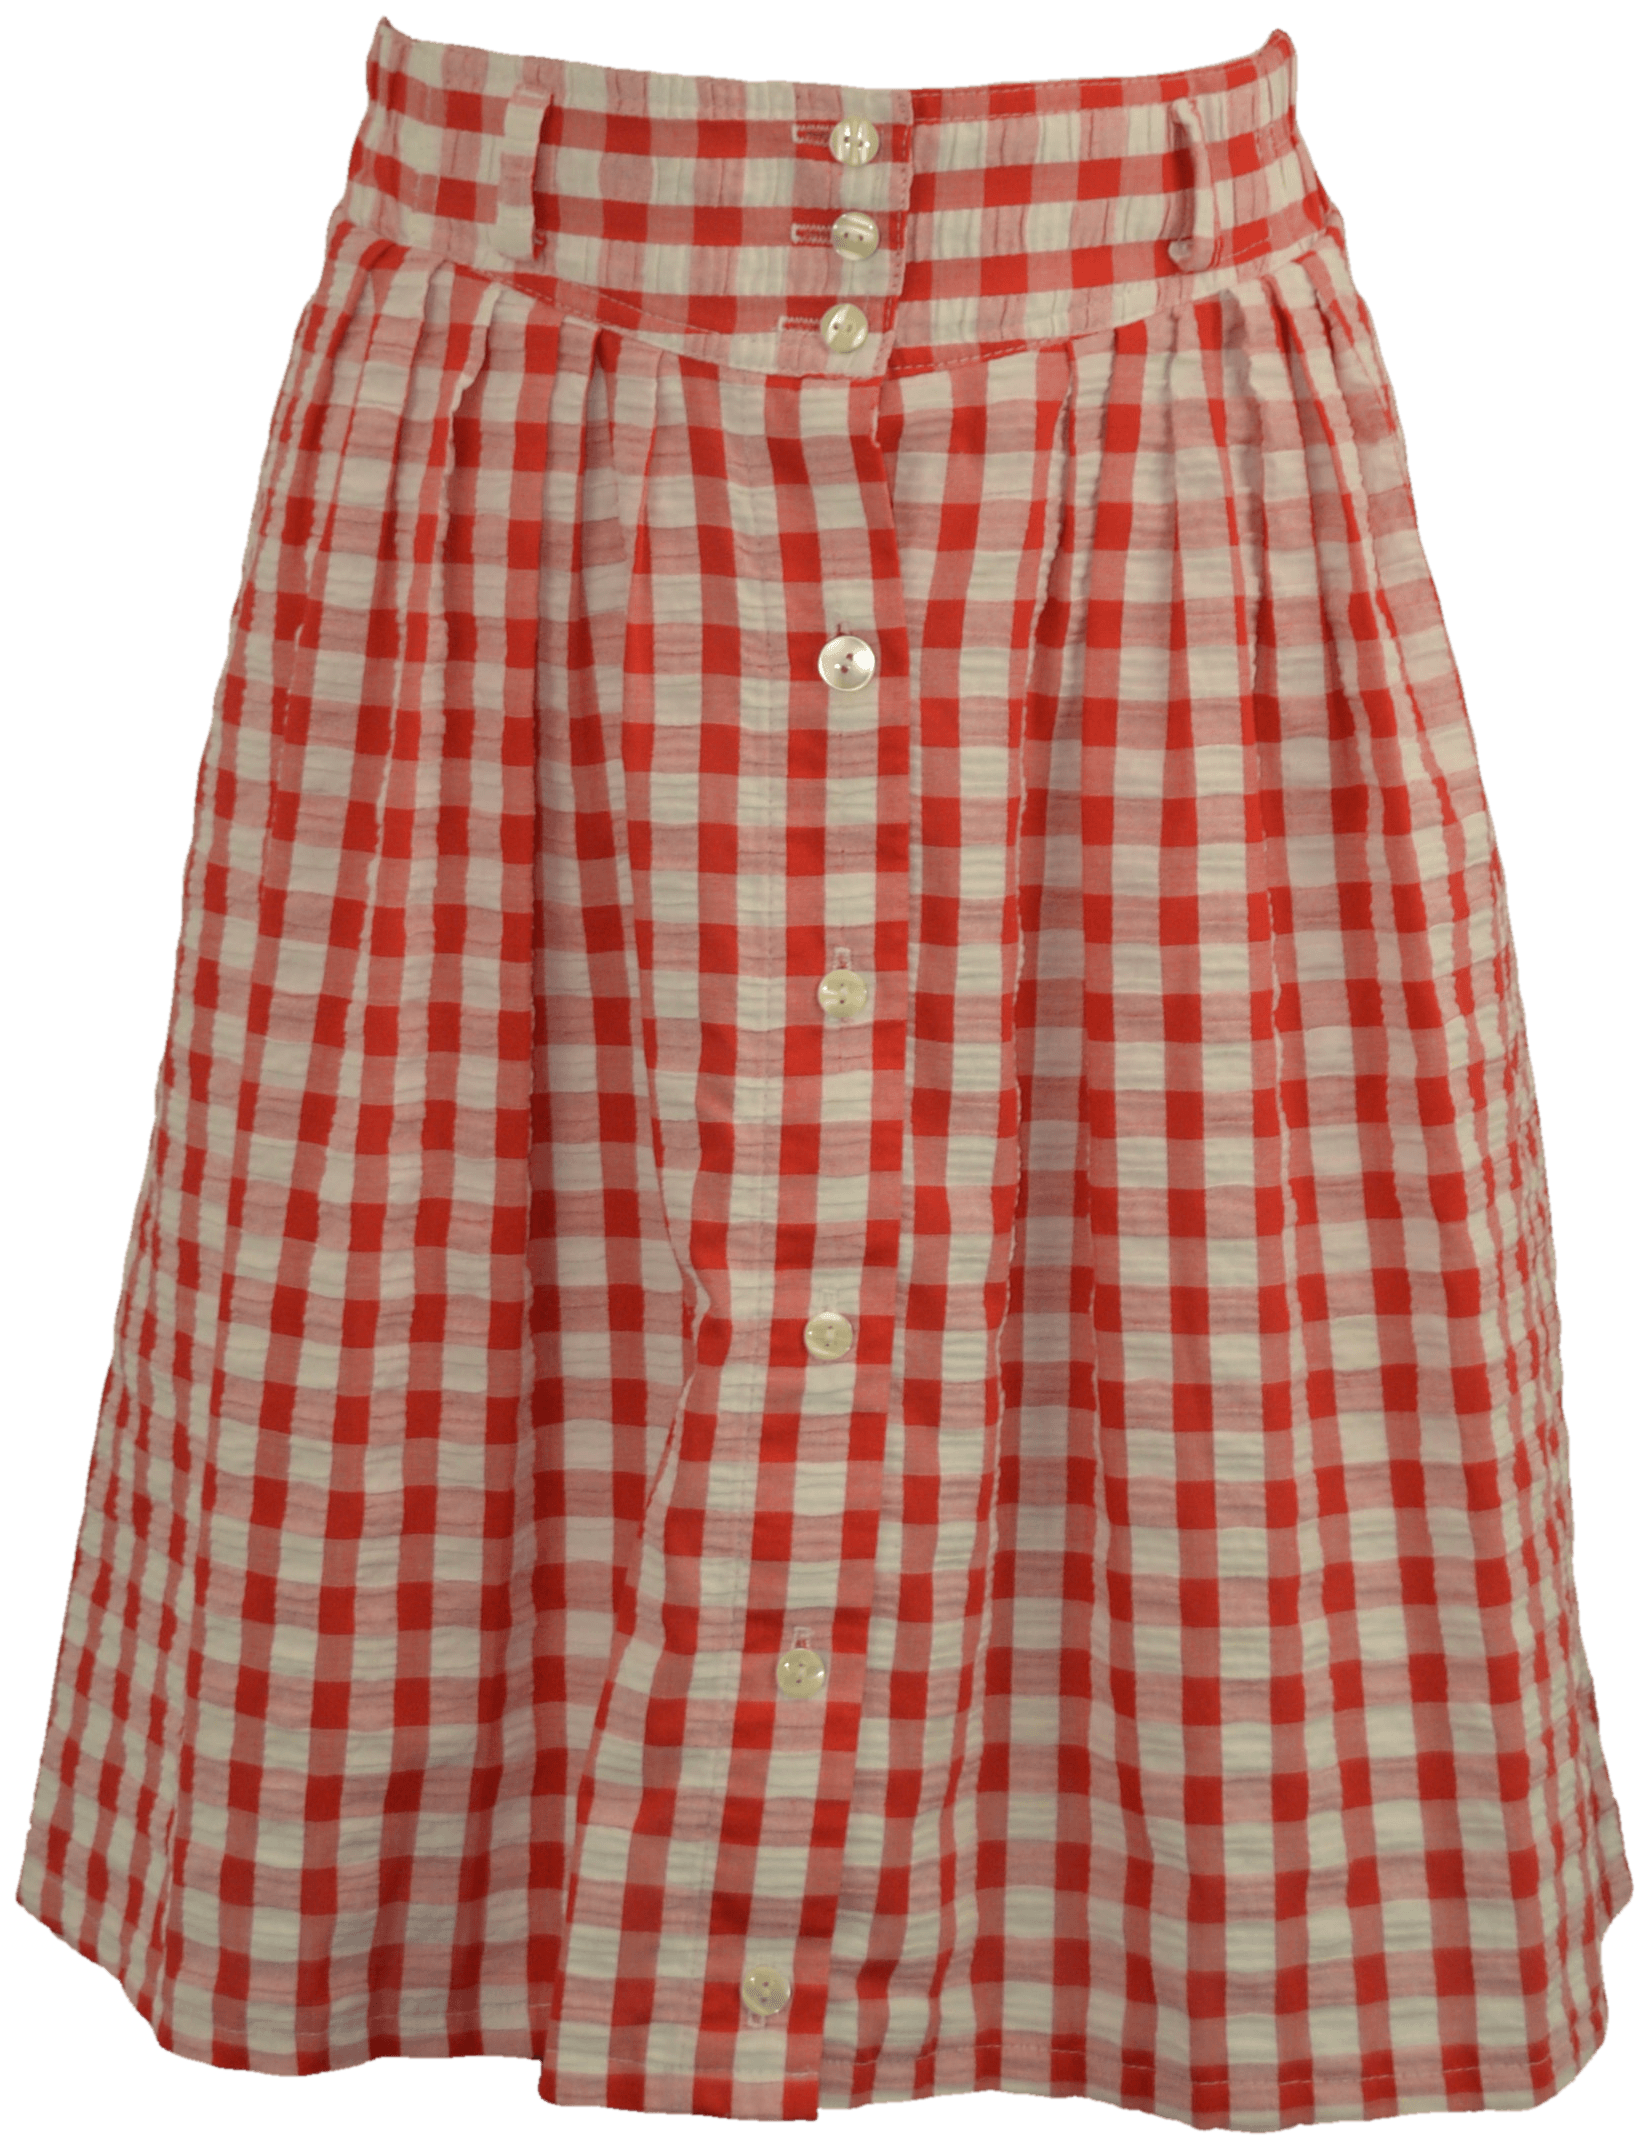 Checkered Button Down Skirt by Koret 